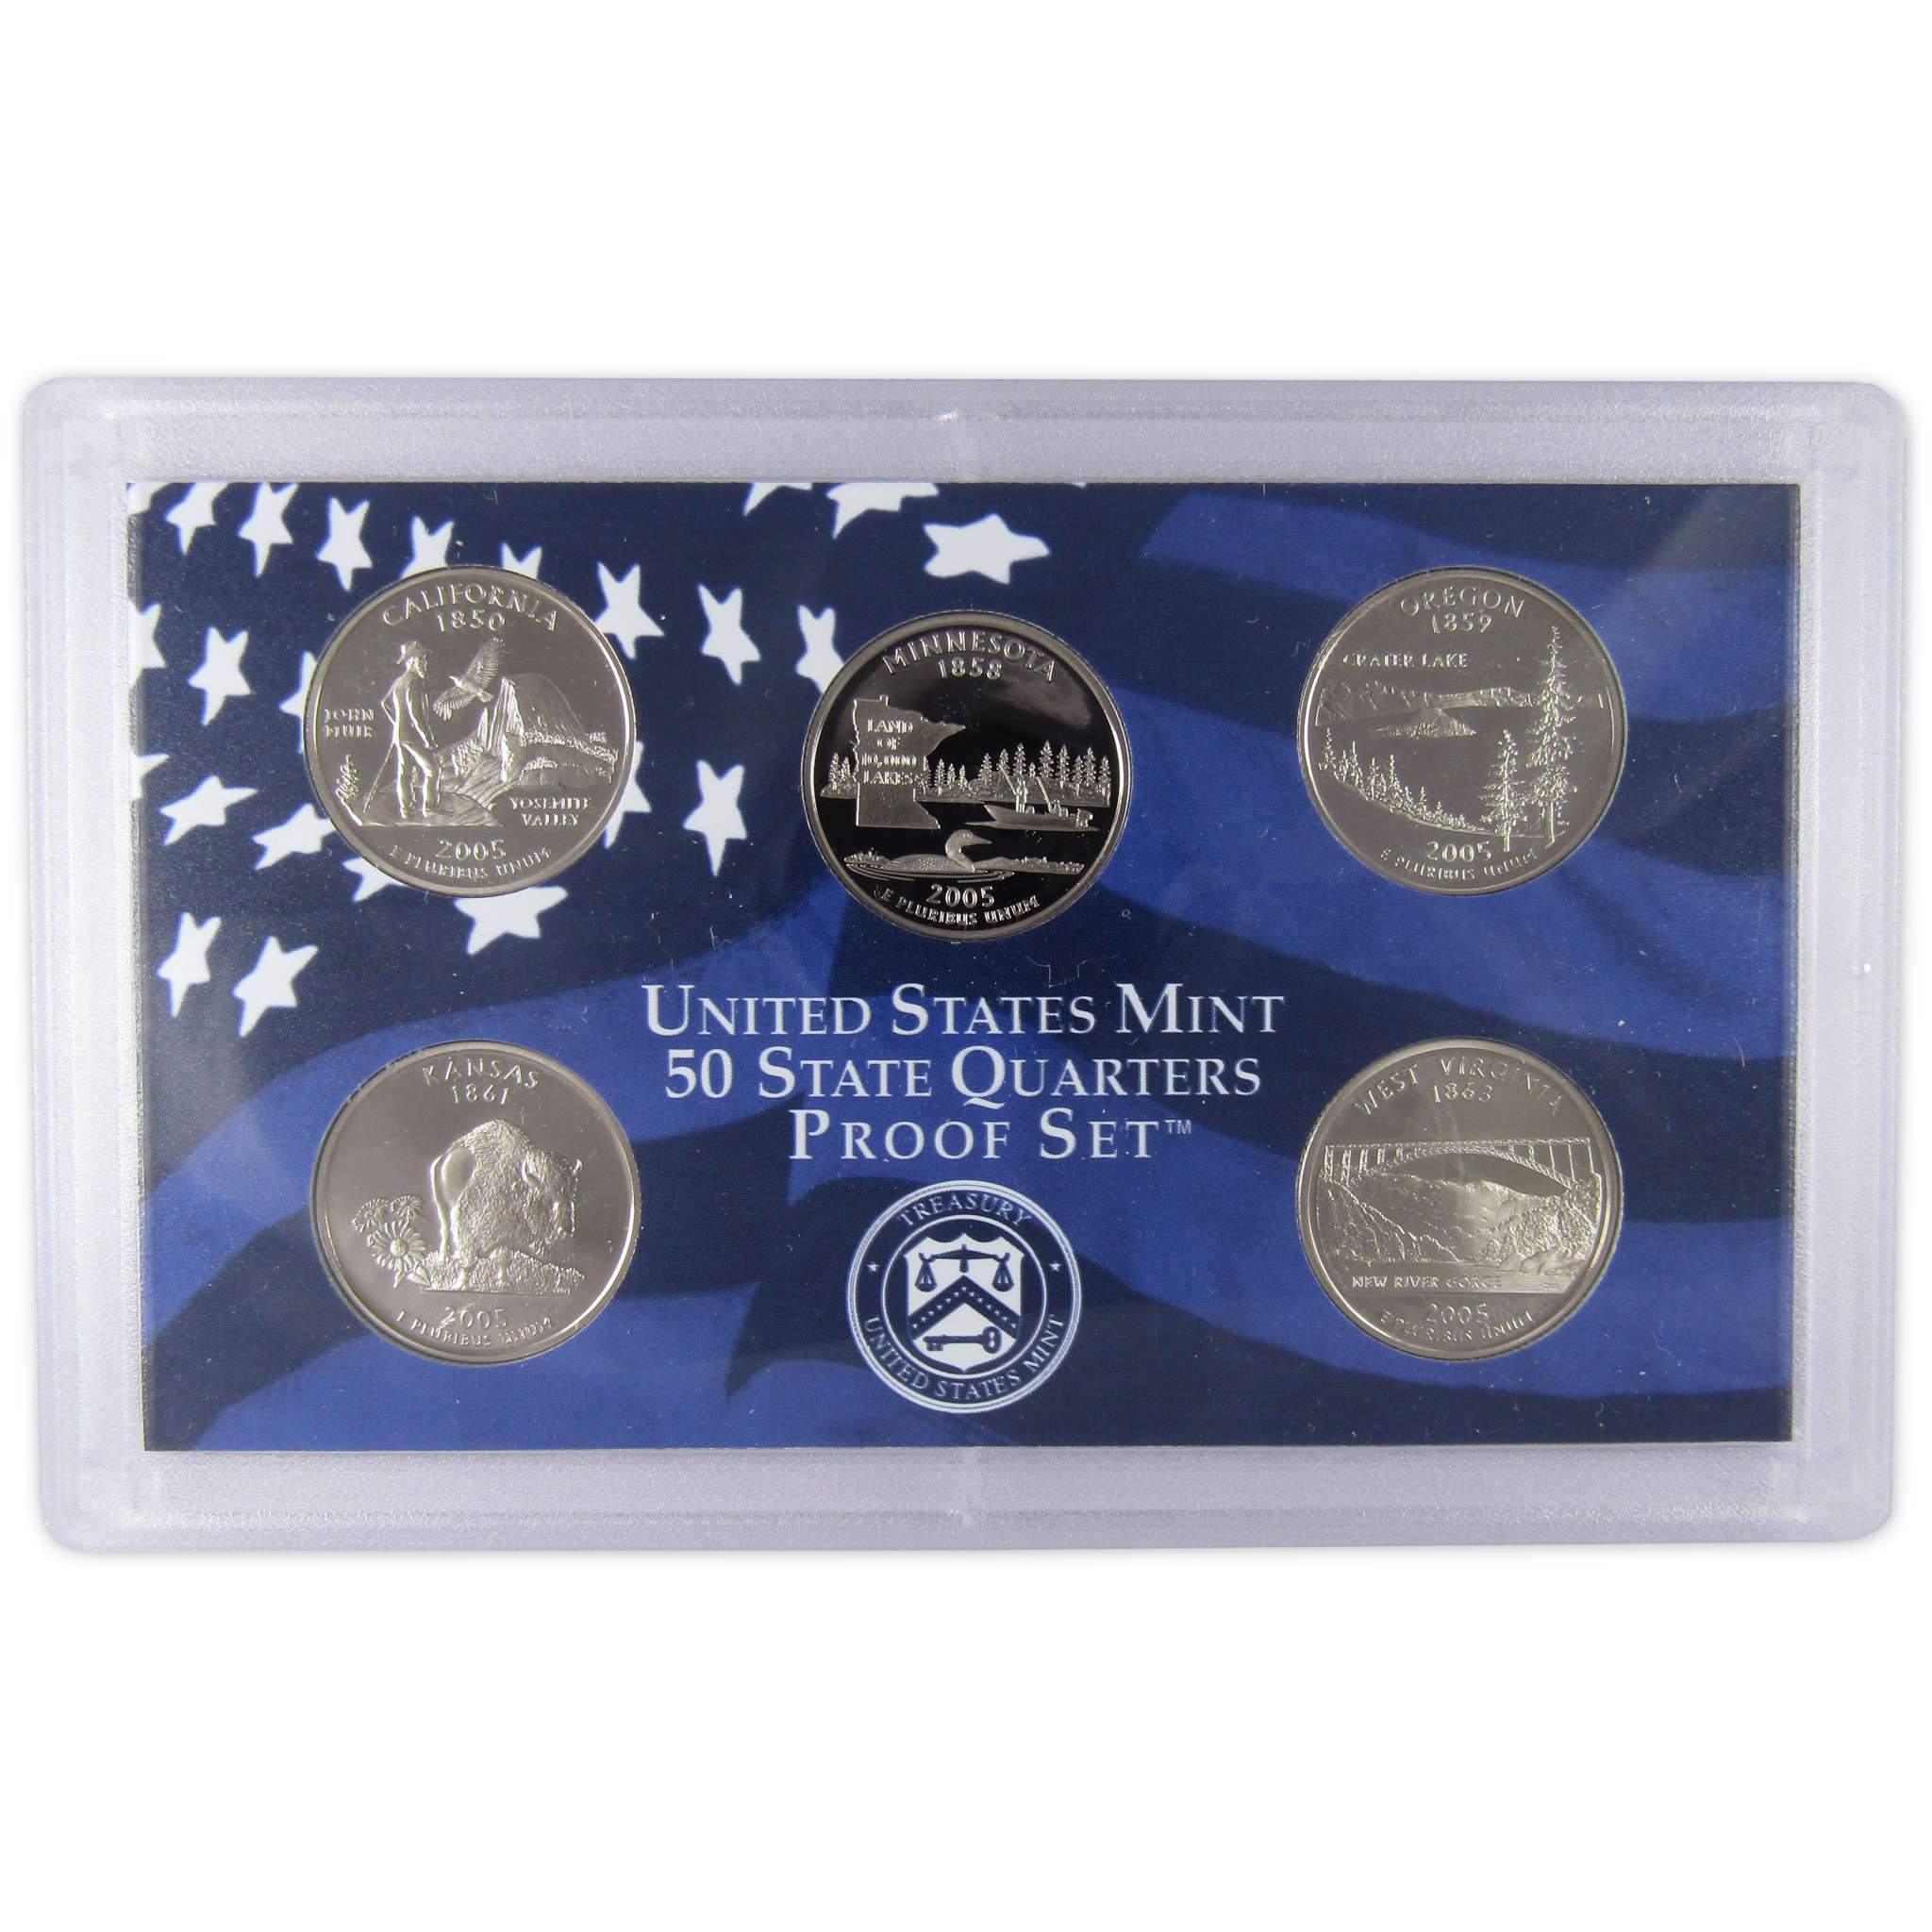 2005 Clad Proof Set U.S. Mint Original Government Packaging OGP Collectible